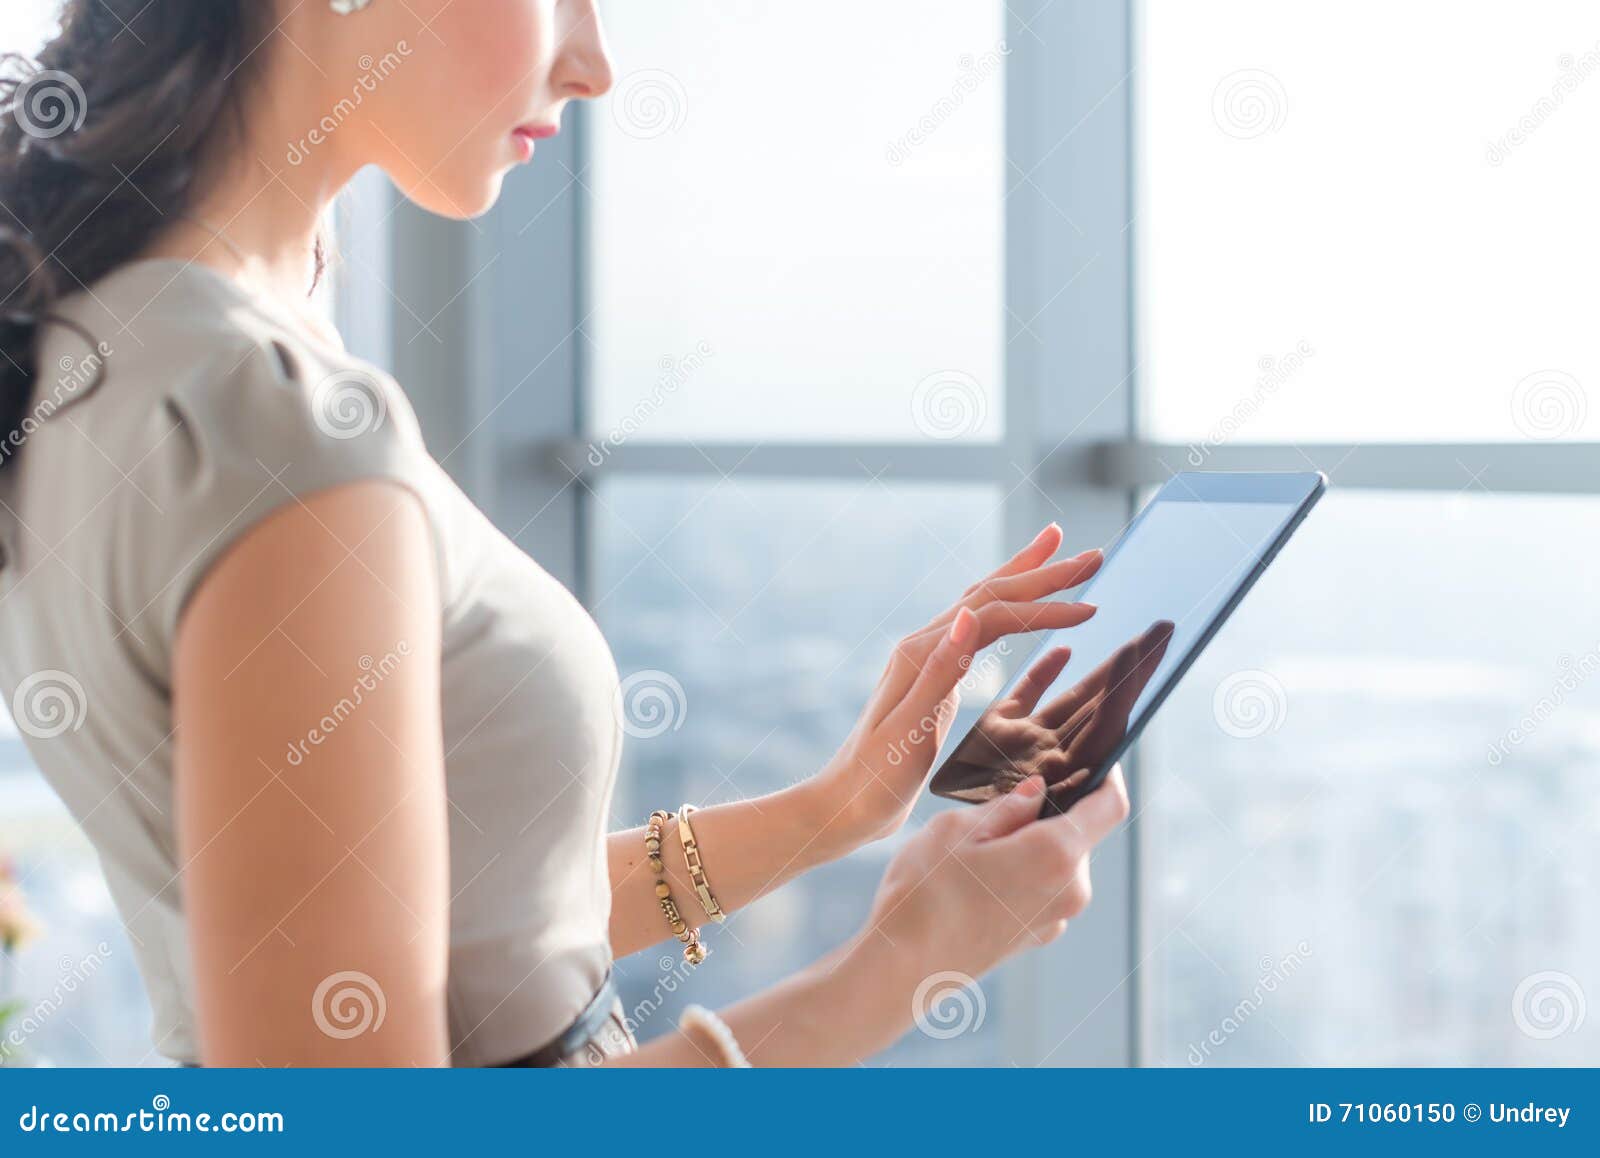 side view photo of young female teleworker using tablet, searching and browsing information via wi-fi connection